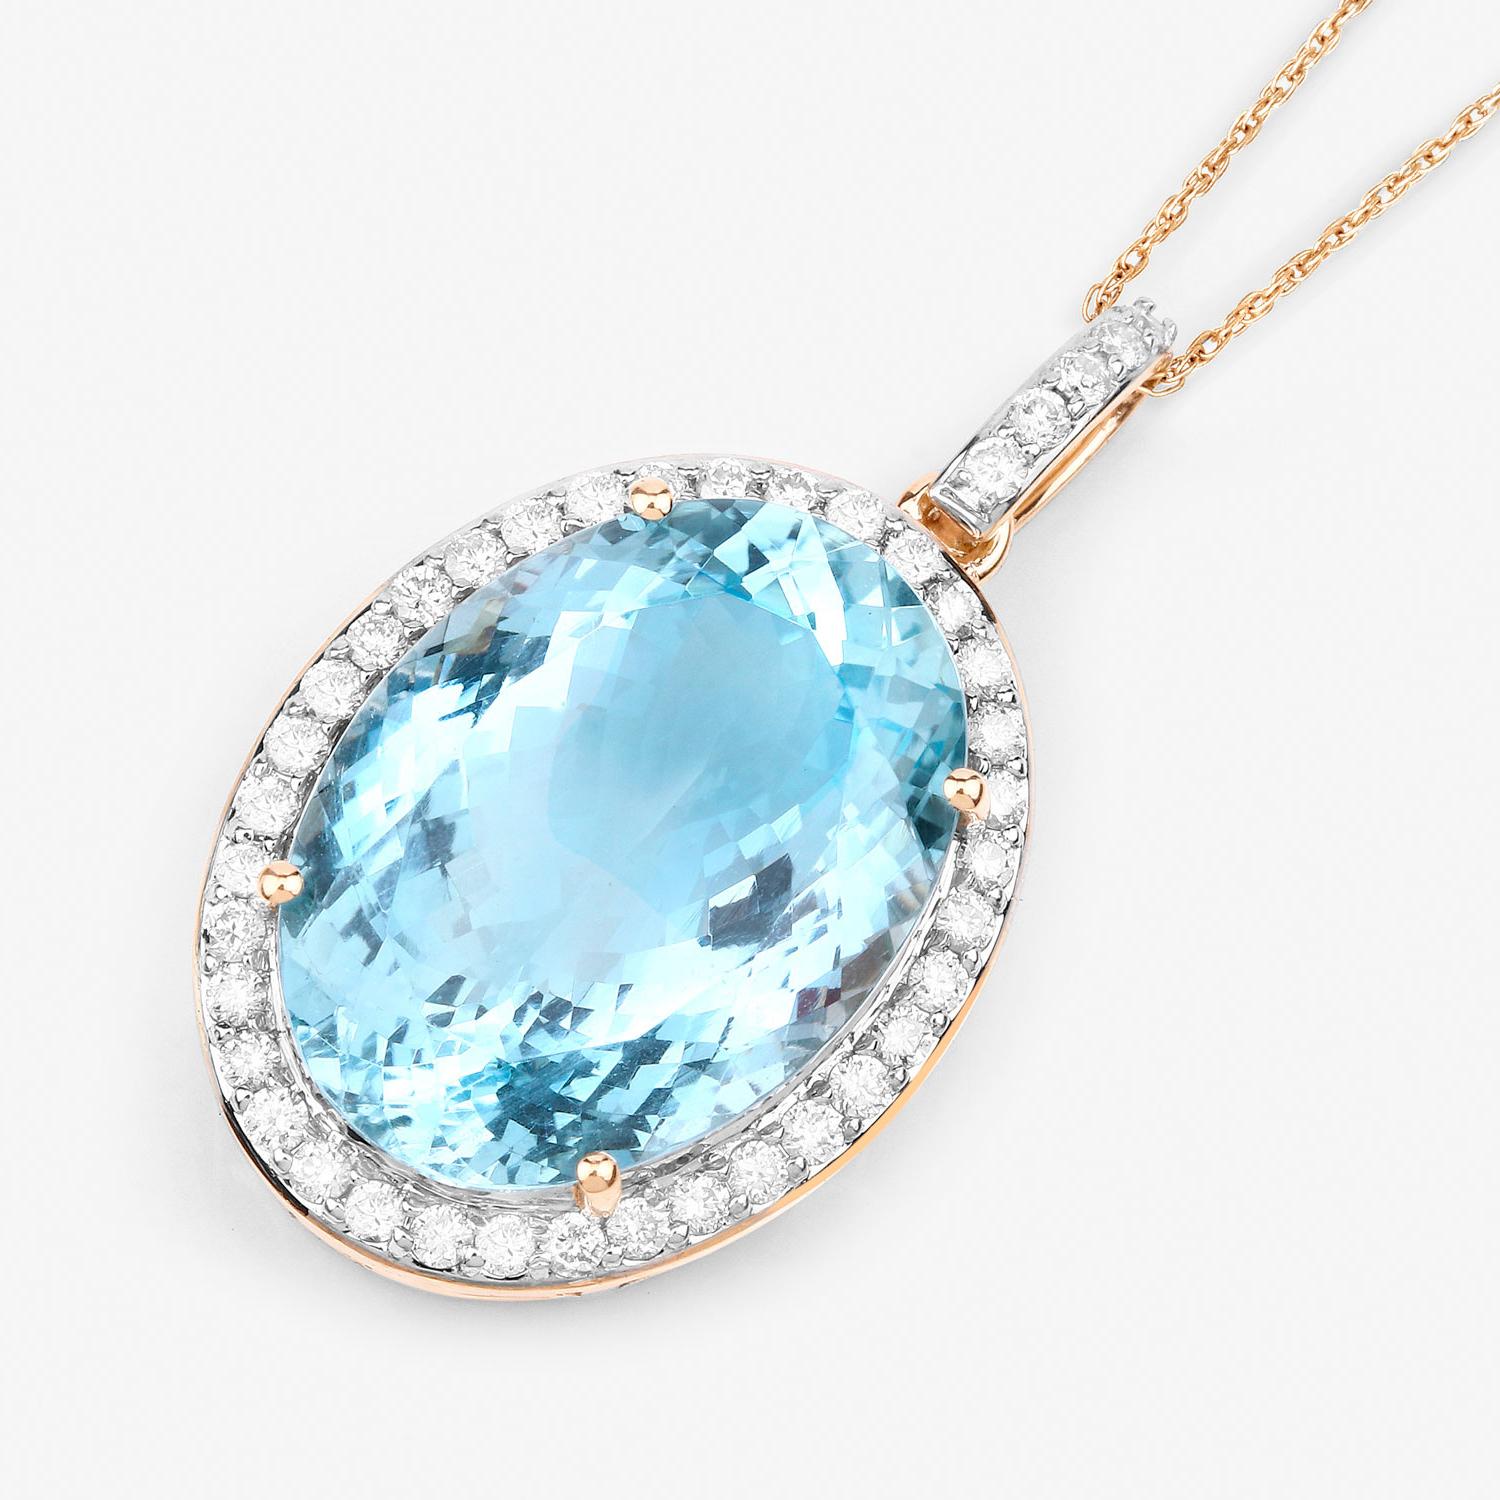 Oval Cut Important Aquamarine Pendant Necklace With Diamonds 13.62 Carats 14K Gold For Sale